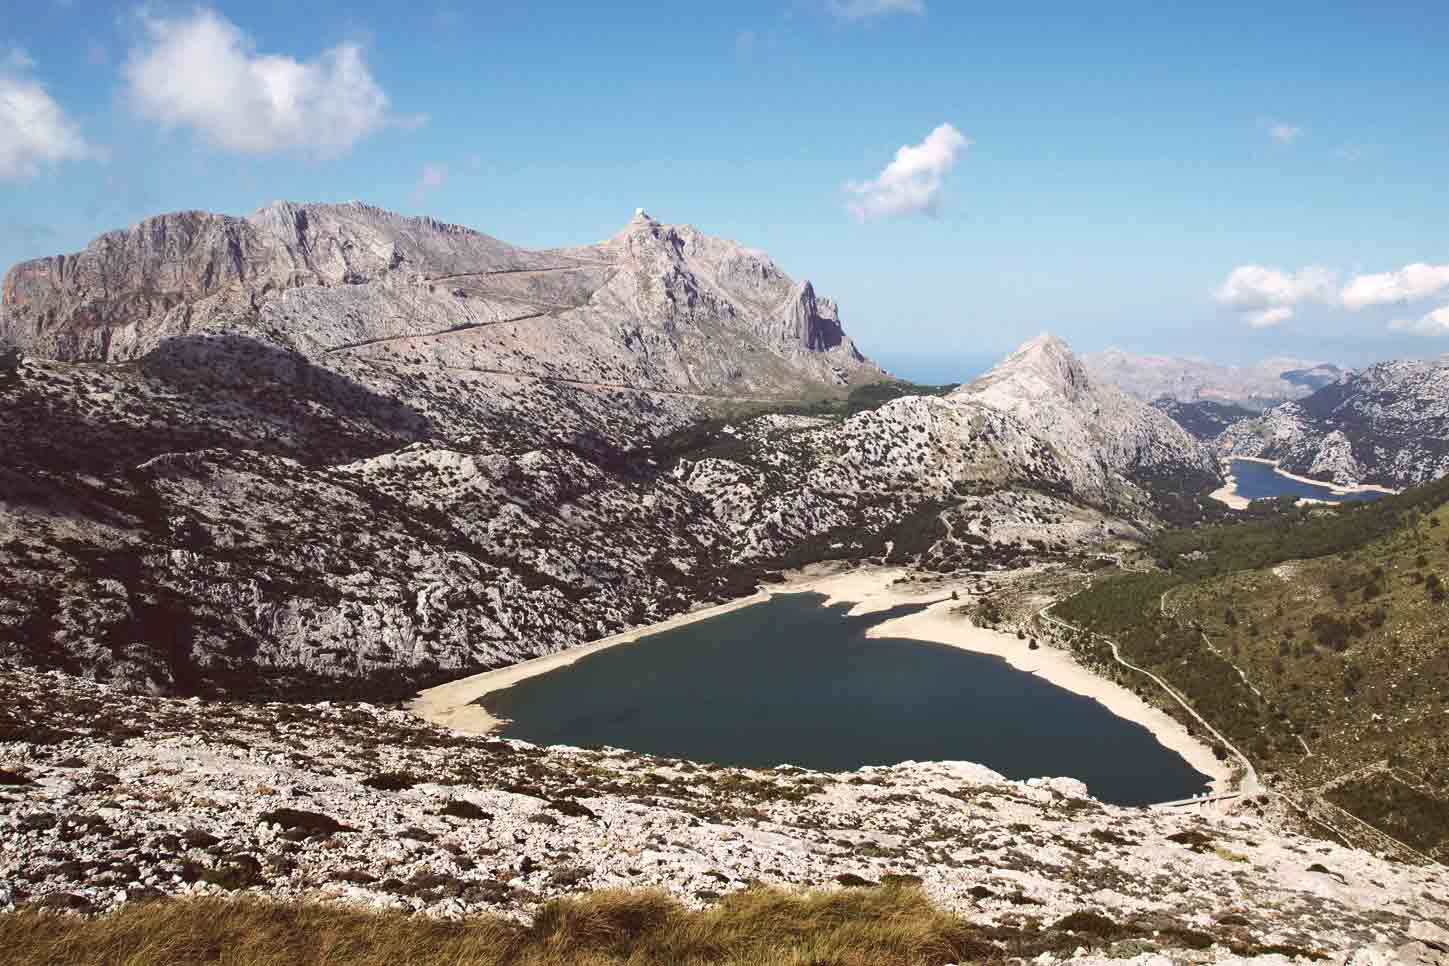 Book one of the Mallorca walking holidays and uncover the outstanding natural beauty of the island